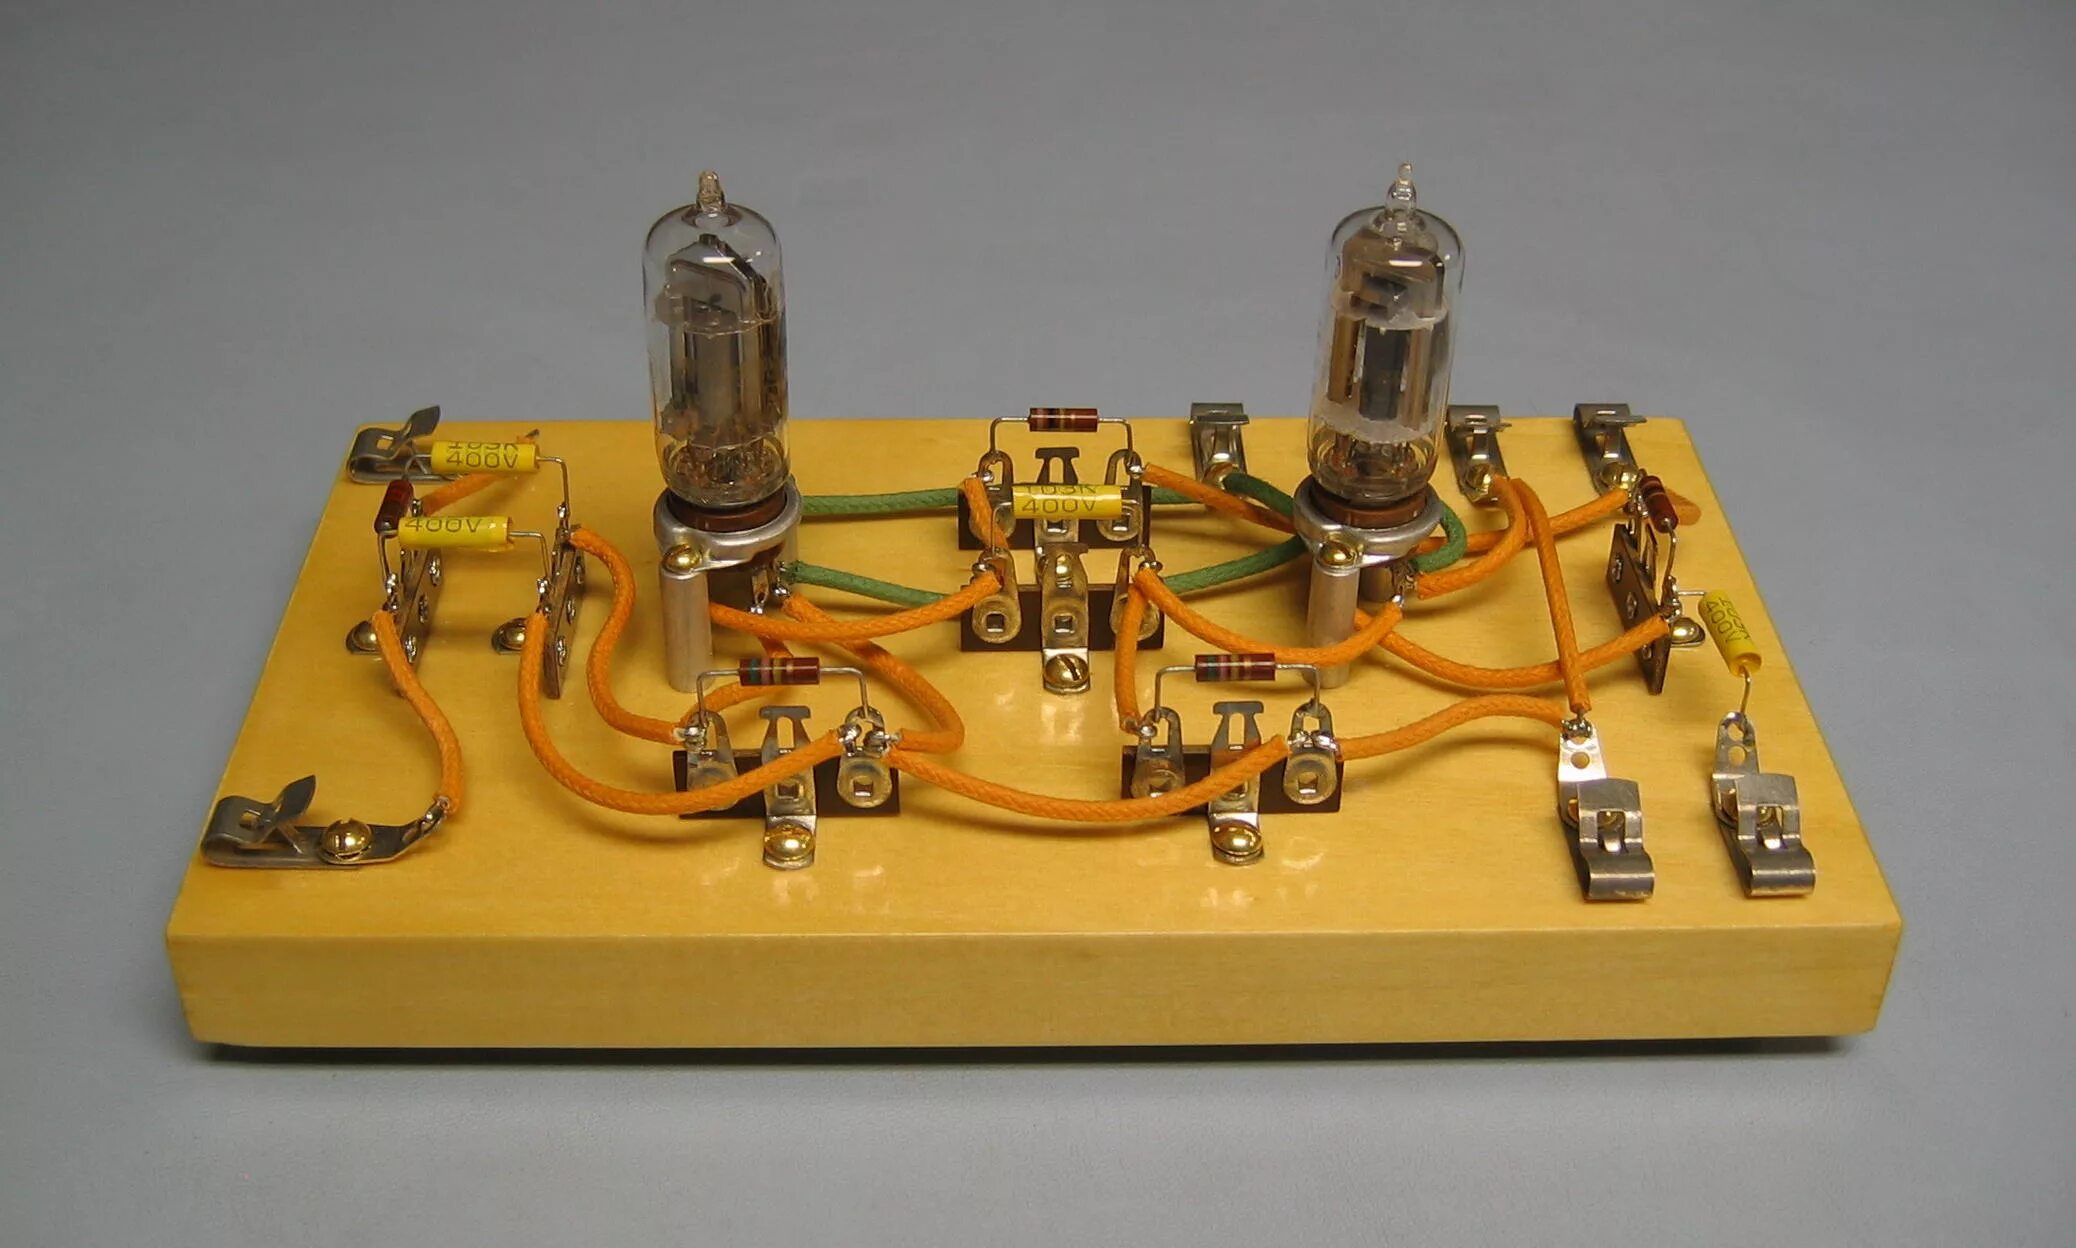 6au6 preamp. 1625 Tube Amplifier. PP tube Amplifier 6a5q. El 504 радиолампа. First tubes